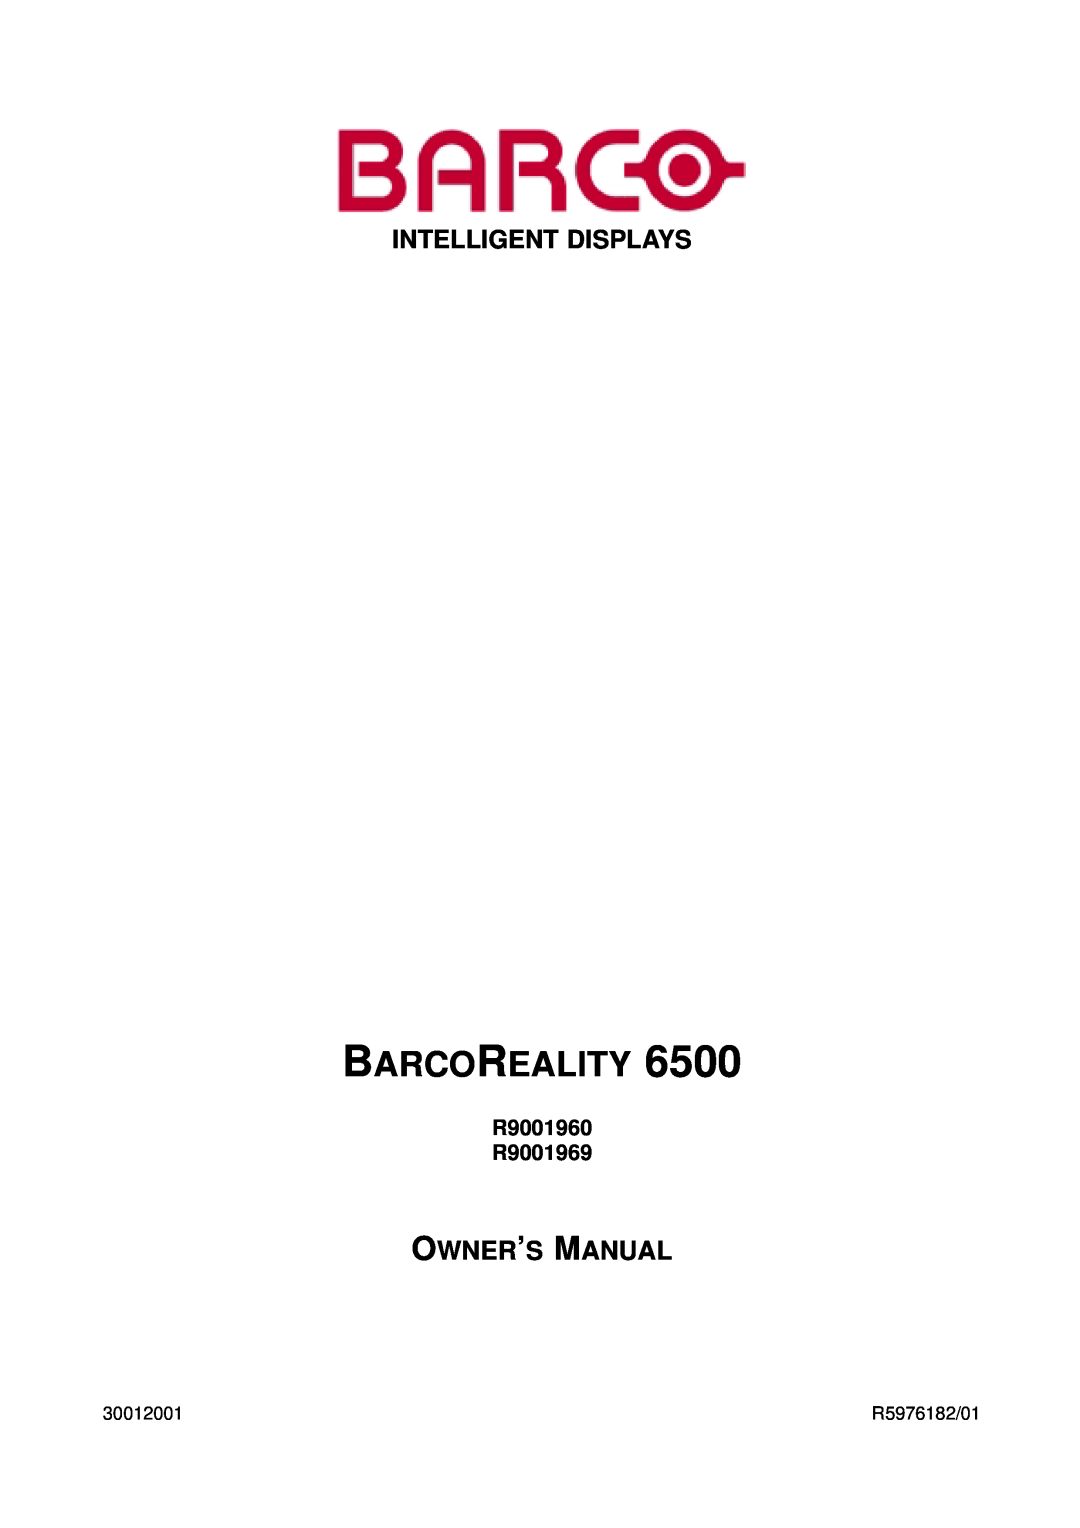 Barco owner manual R9001960 R9001969, Barcoreality, Intelligent Displays, Owner’S Manual, 30012001, R5976182/01 